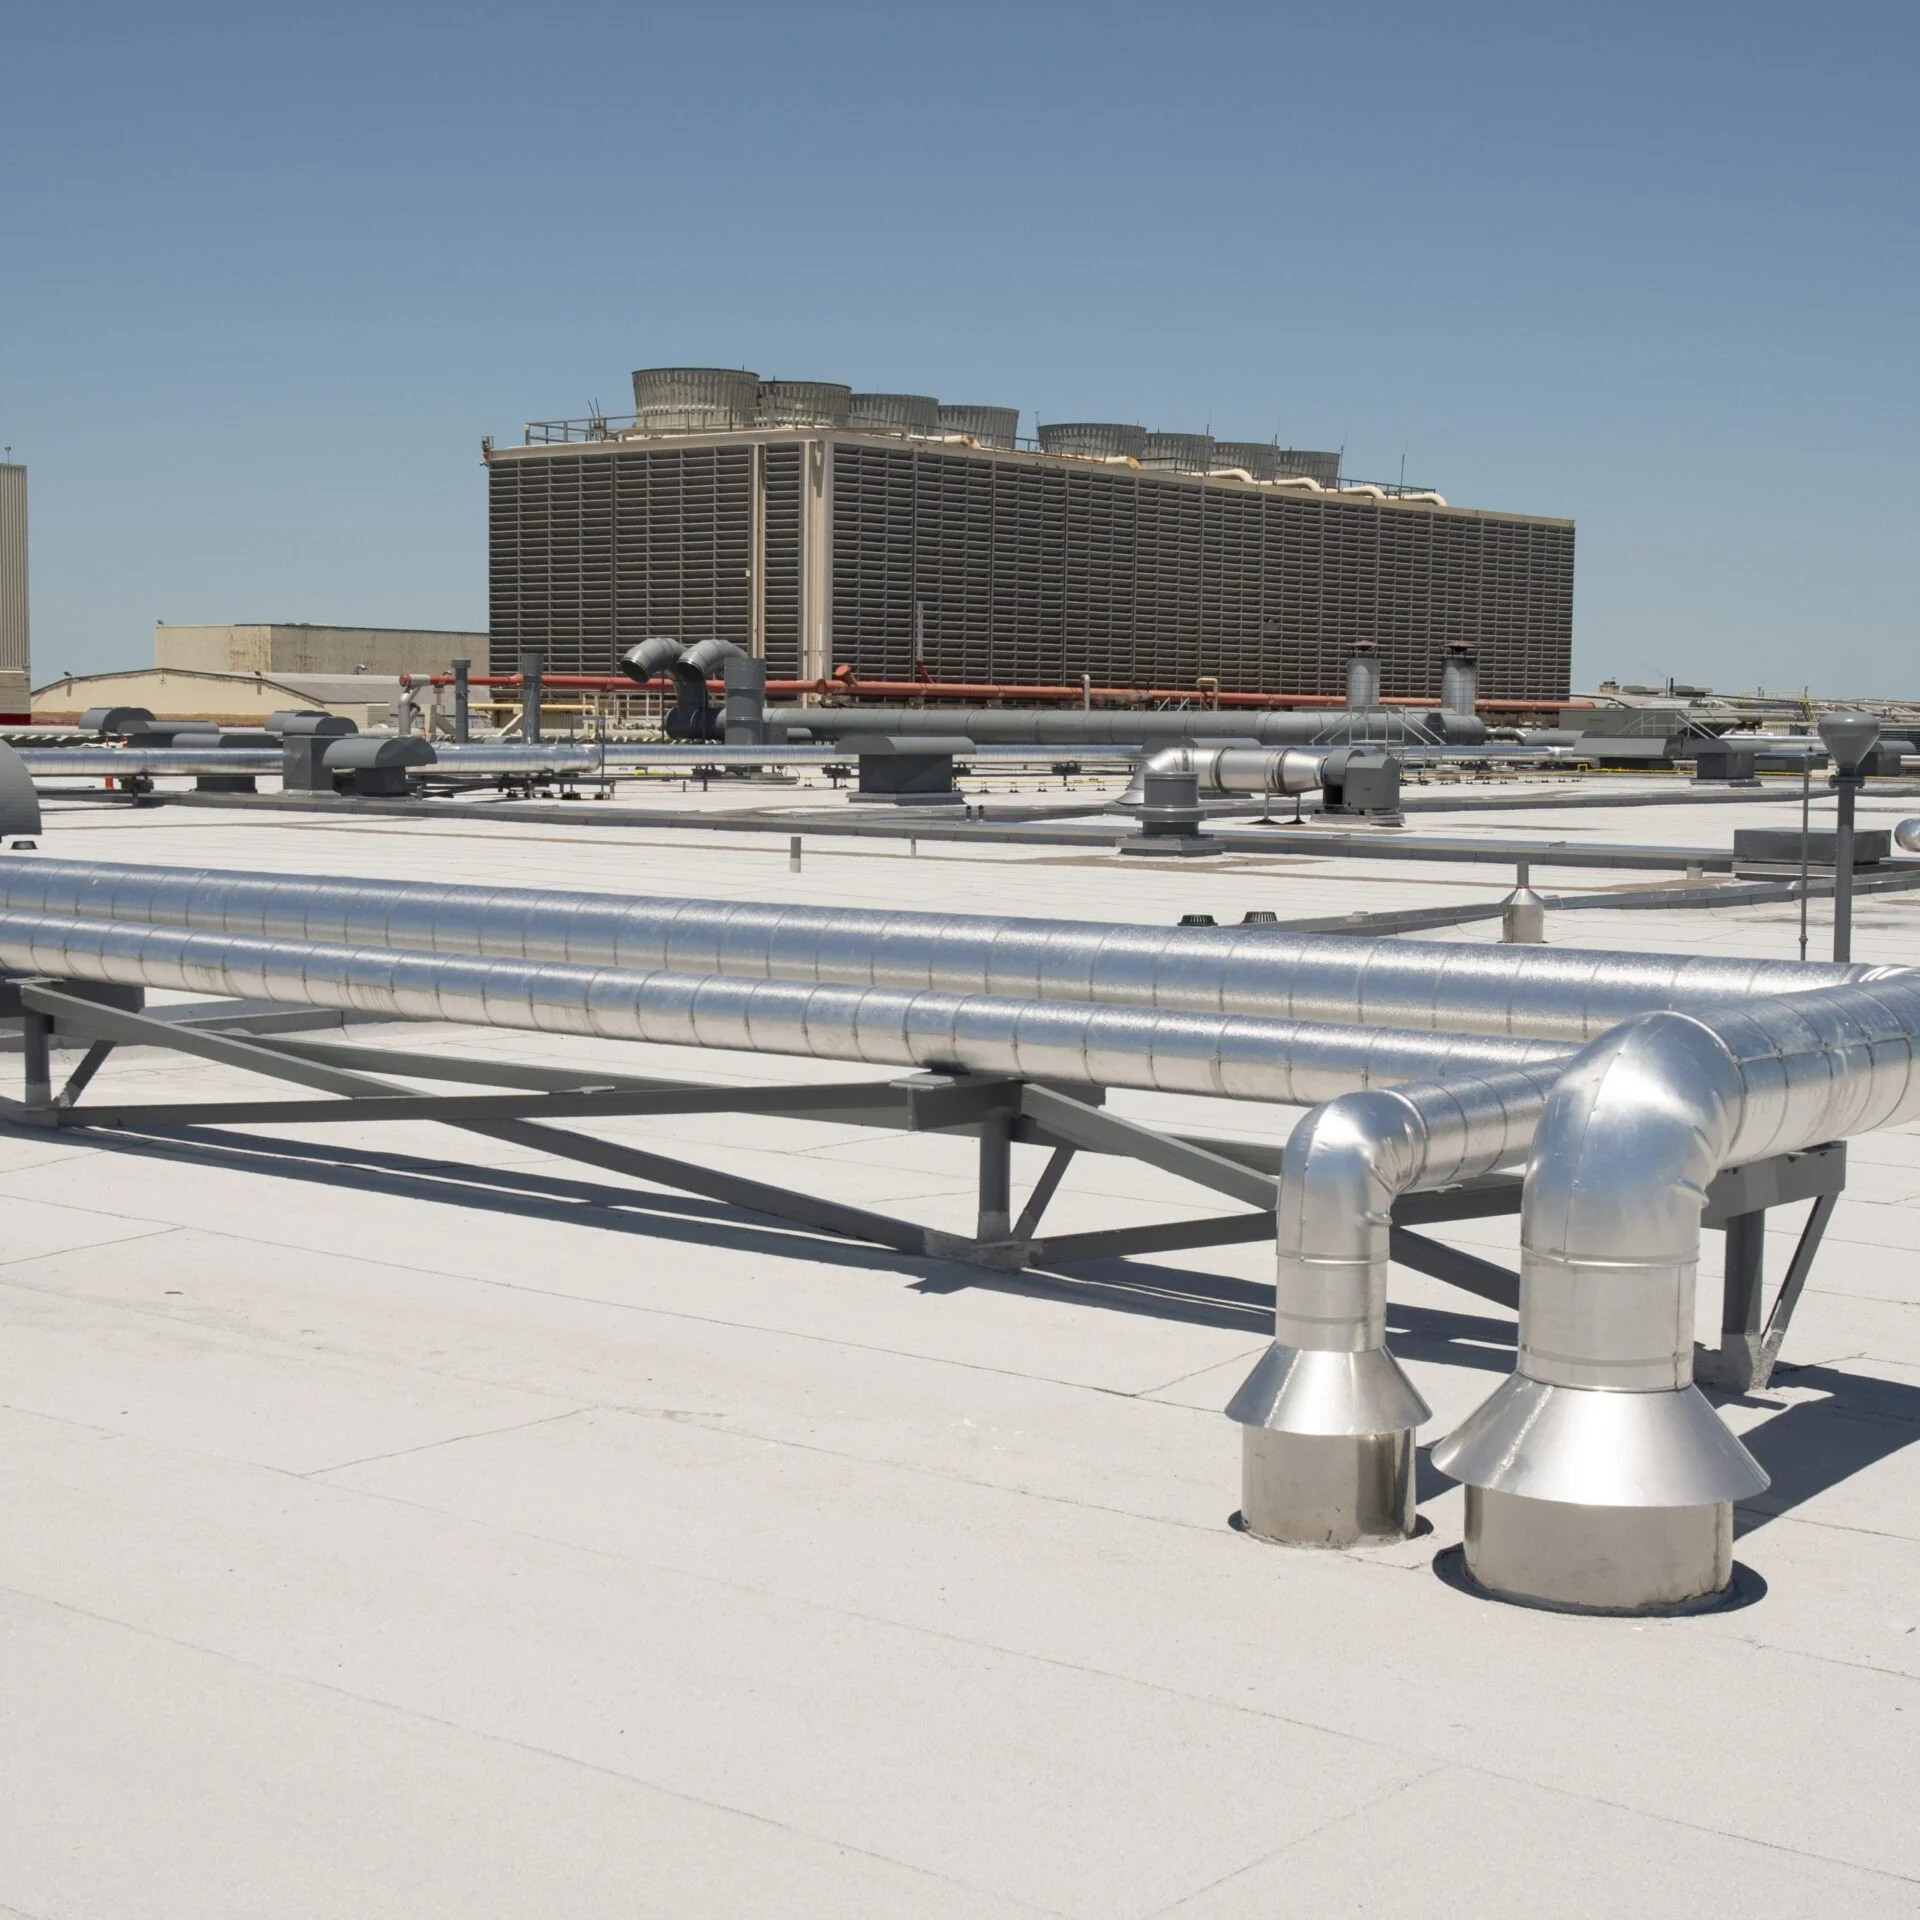 Image shot at American Airlines Plant, Completed Shots, Tulsa, Oklahoma, May 21, 2020, Jeffrey Parr/Supreme Roofing